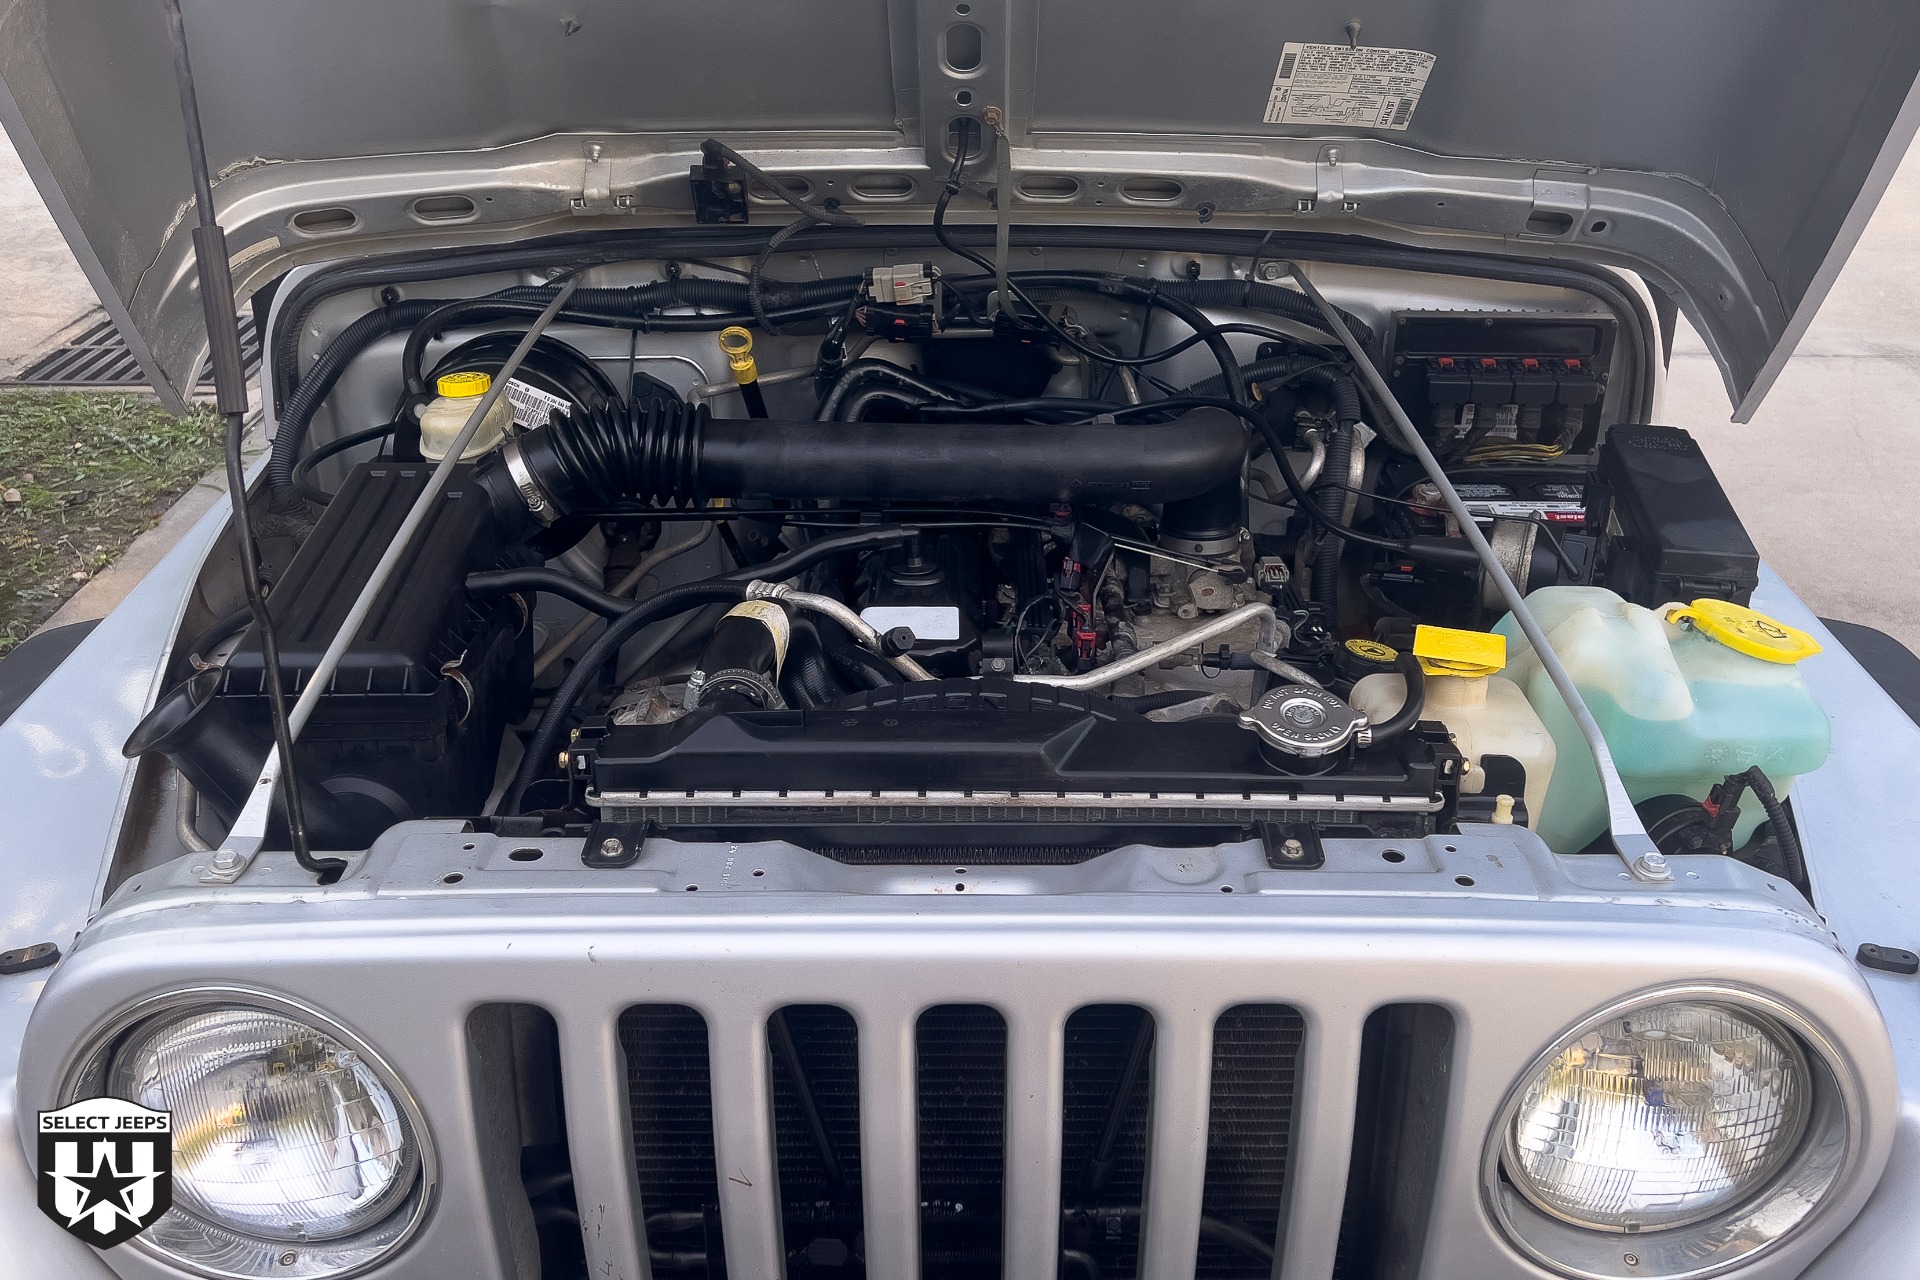 Used 2006 Jeep Wrangler Sport RHD For Sale ($10,995) | Select Jeeps Inc.  Stock #744883